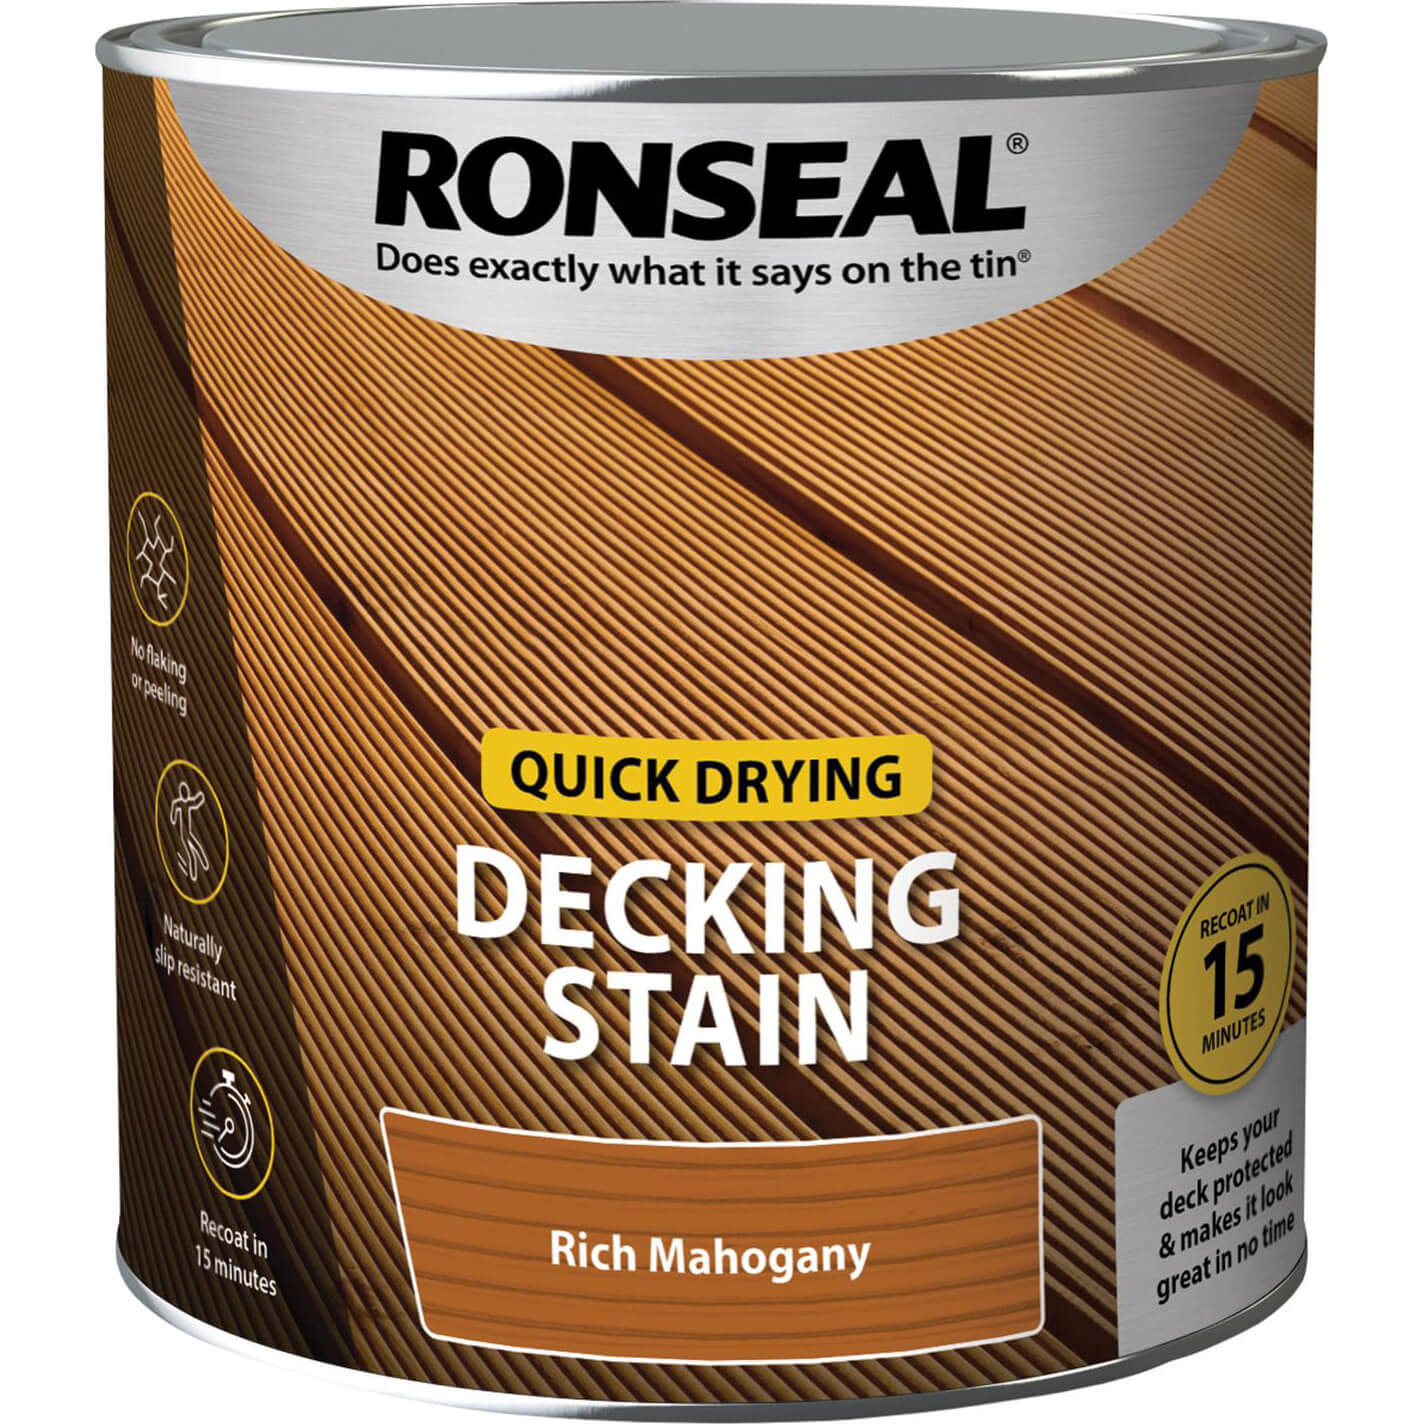 Ronseal Quick Drying Decking Stain 2.5l Rich Mahogany